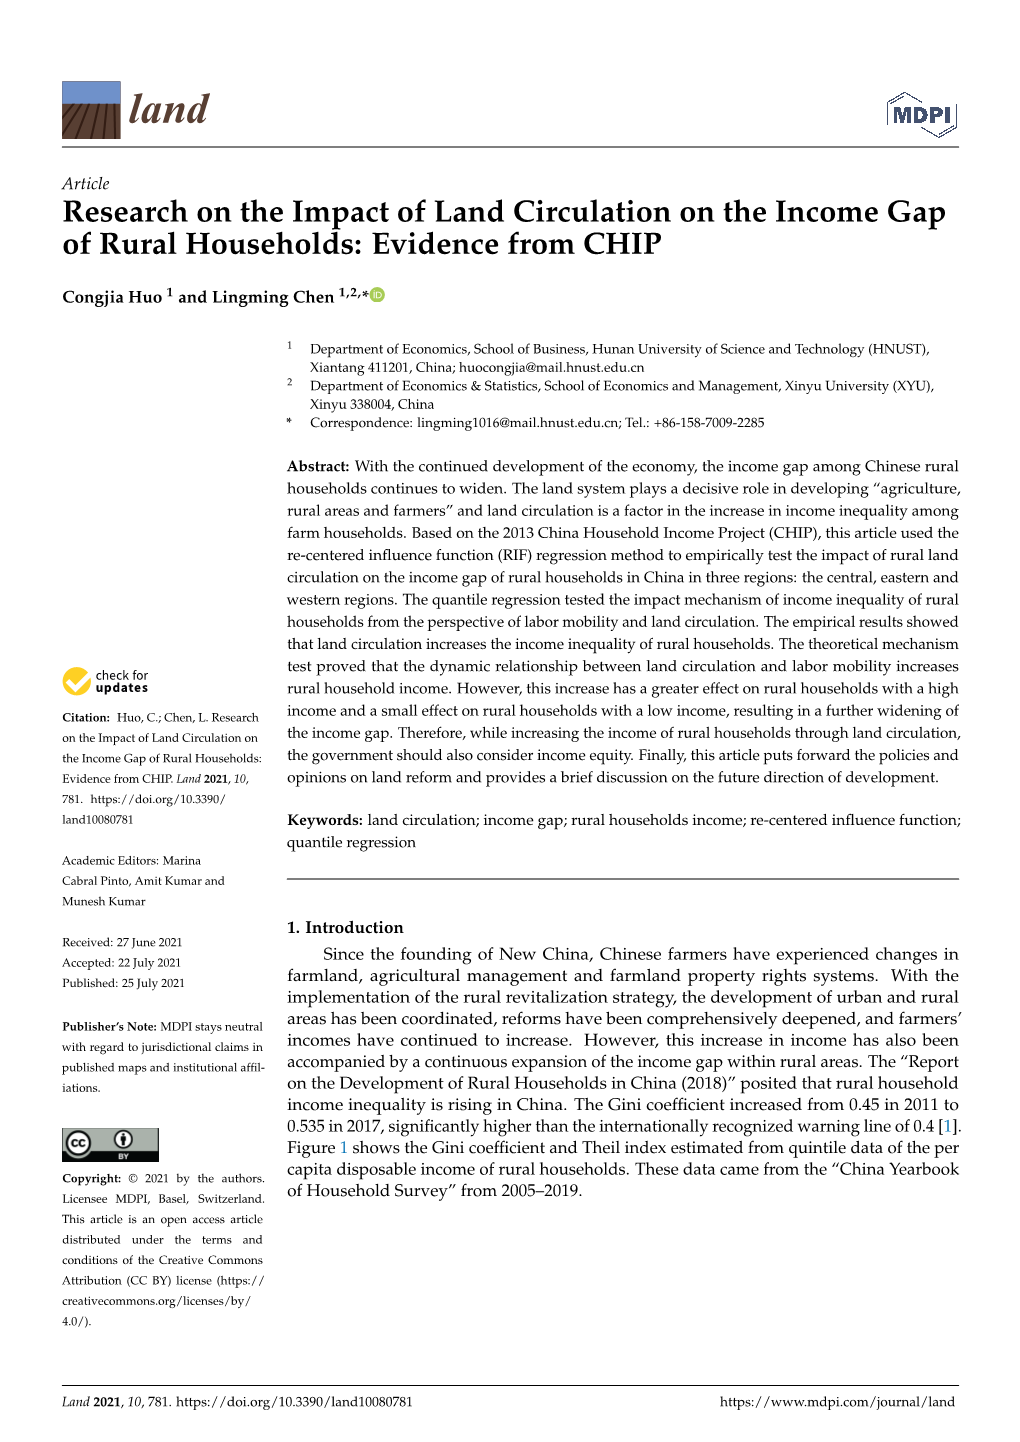 Research on the Impact of Land Circulation on the Income Gap of Rural Households: Evidence from CHIP